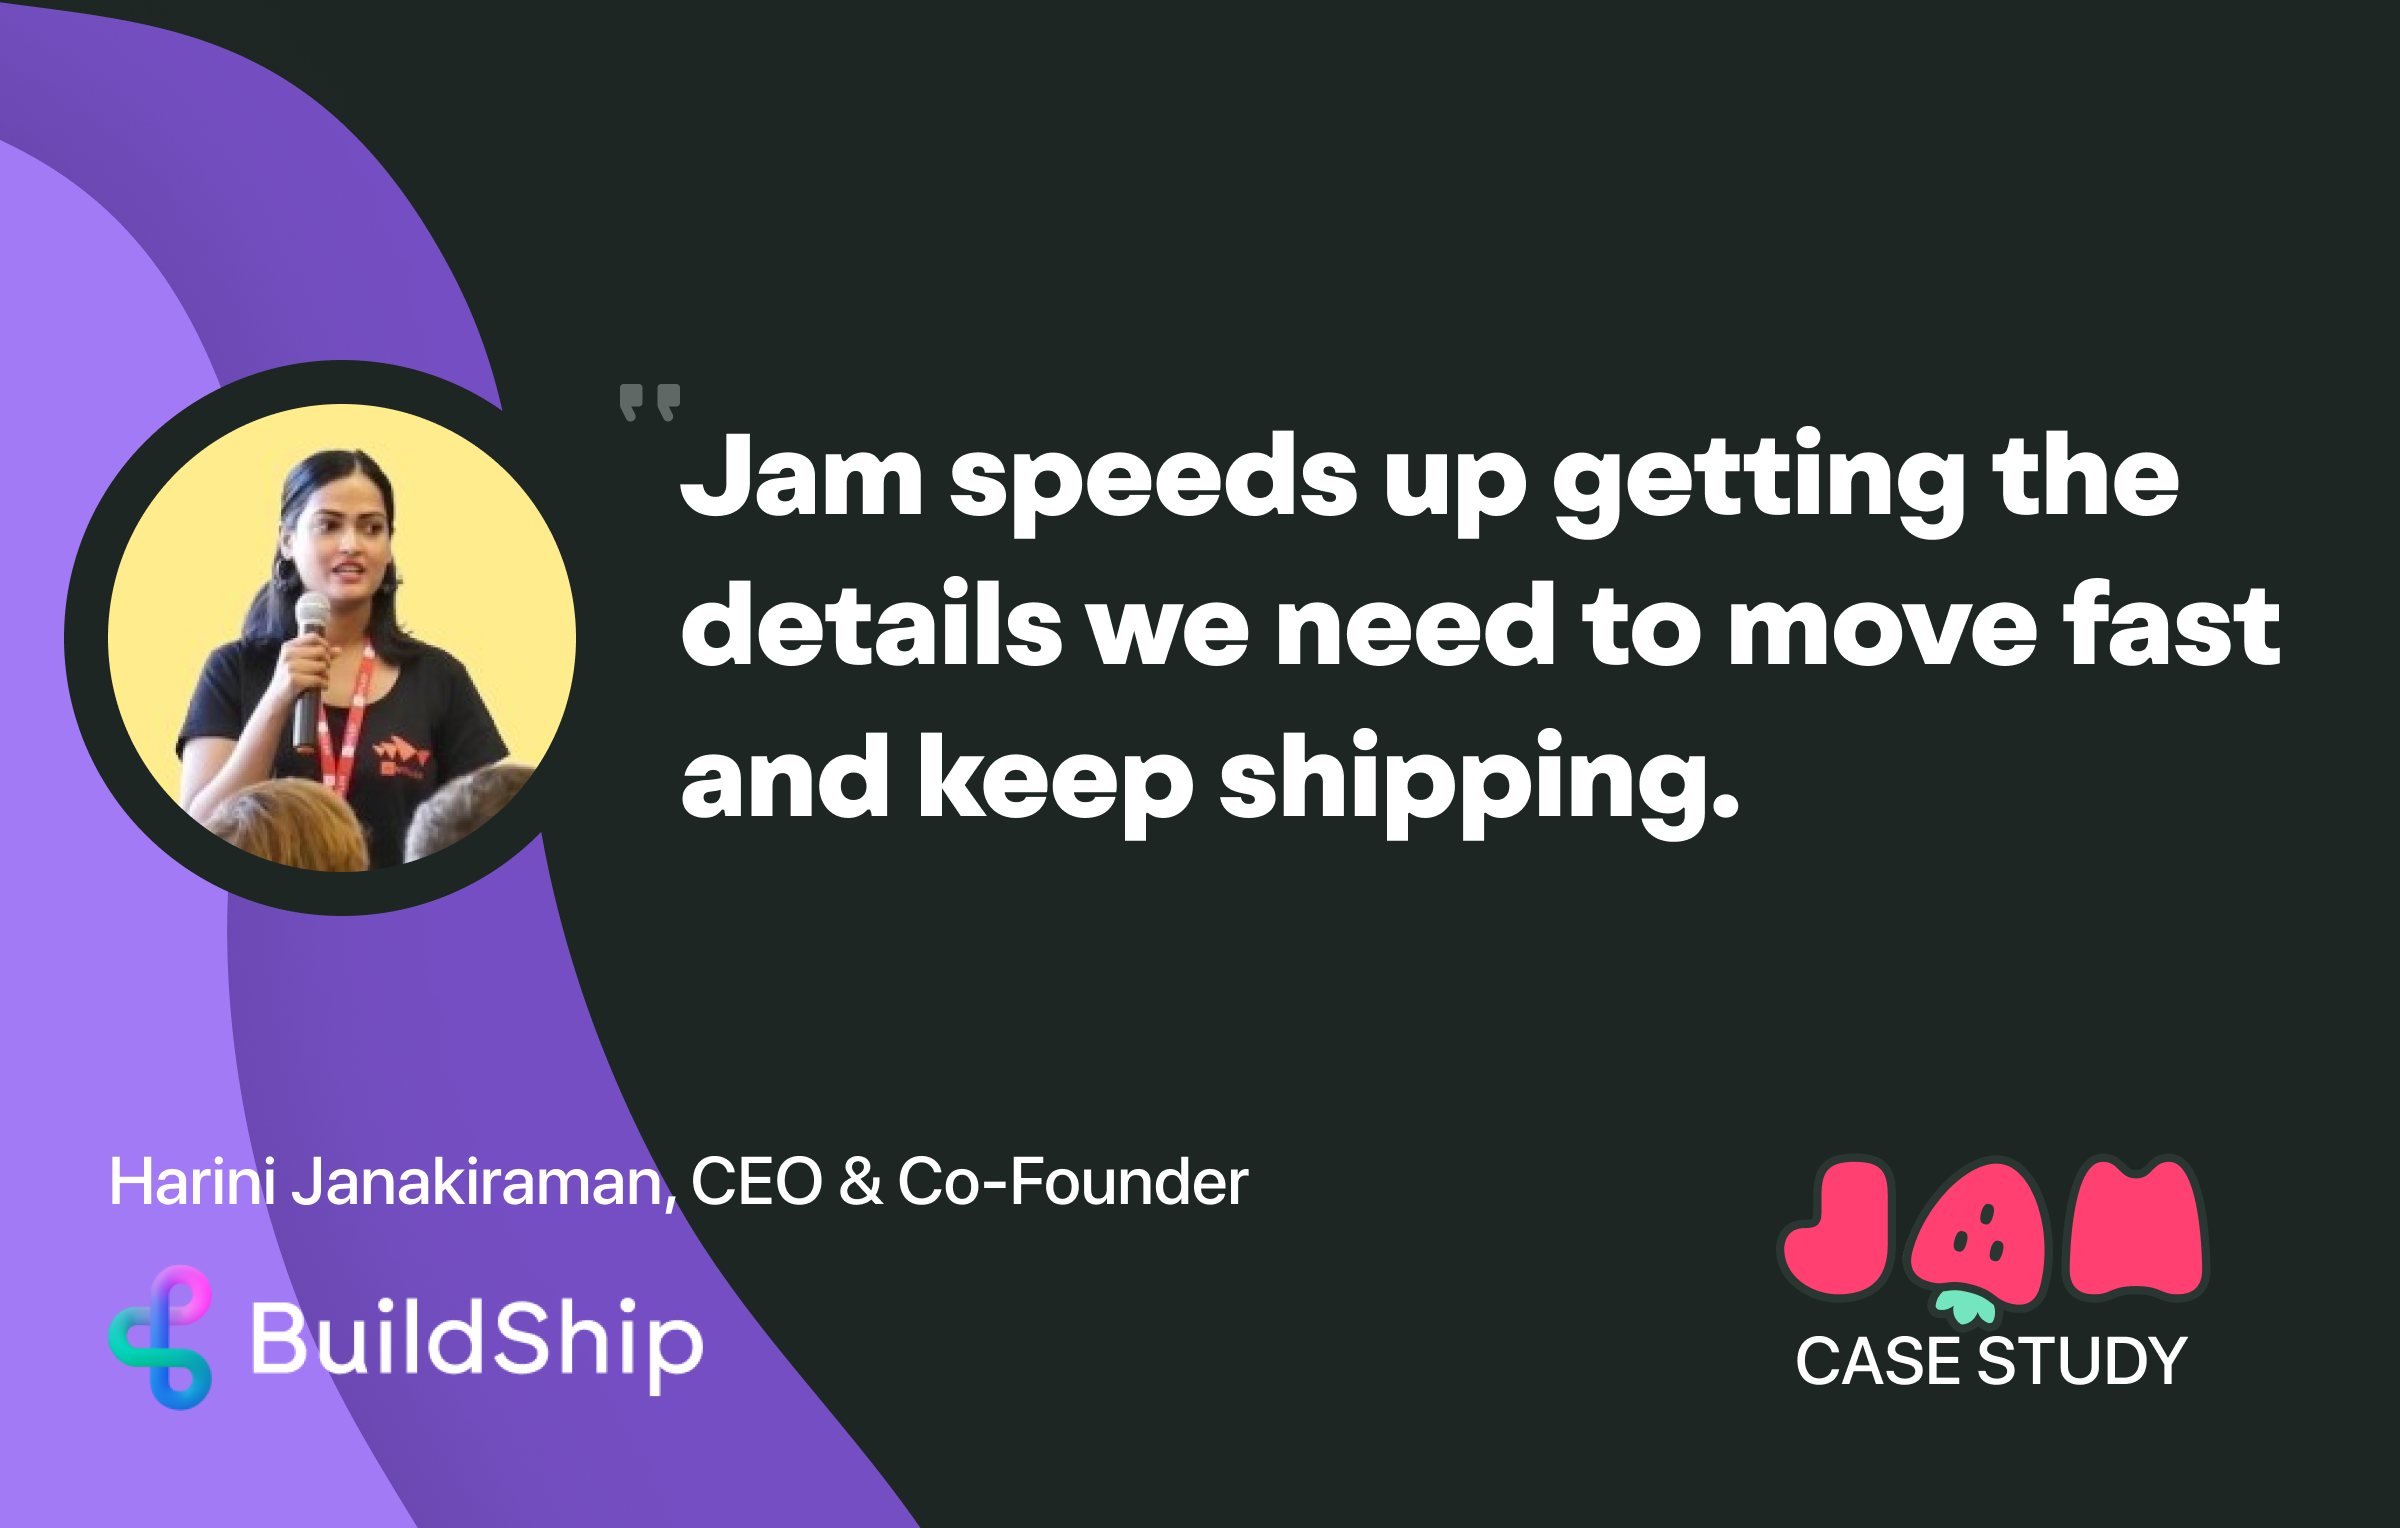 How BuildShip increased engineering support speed 2X with Jam